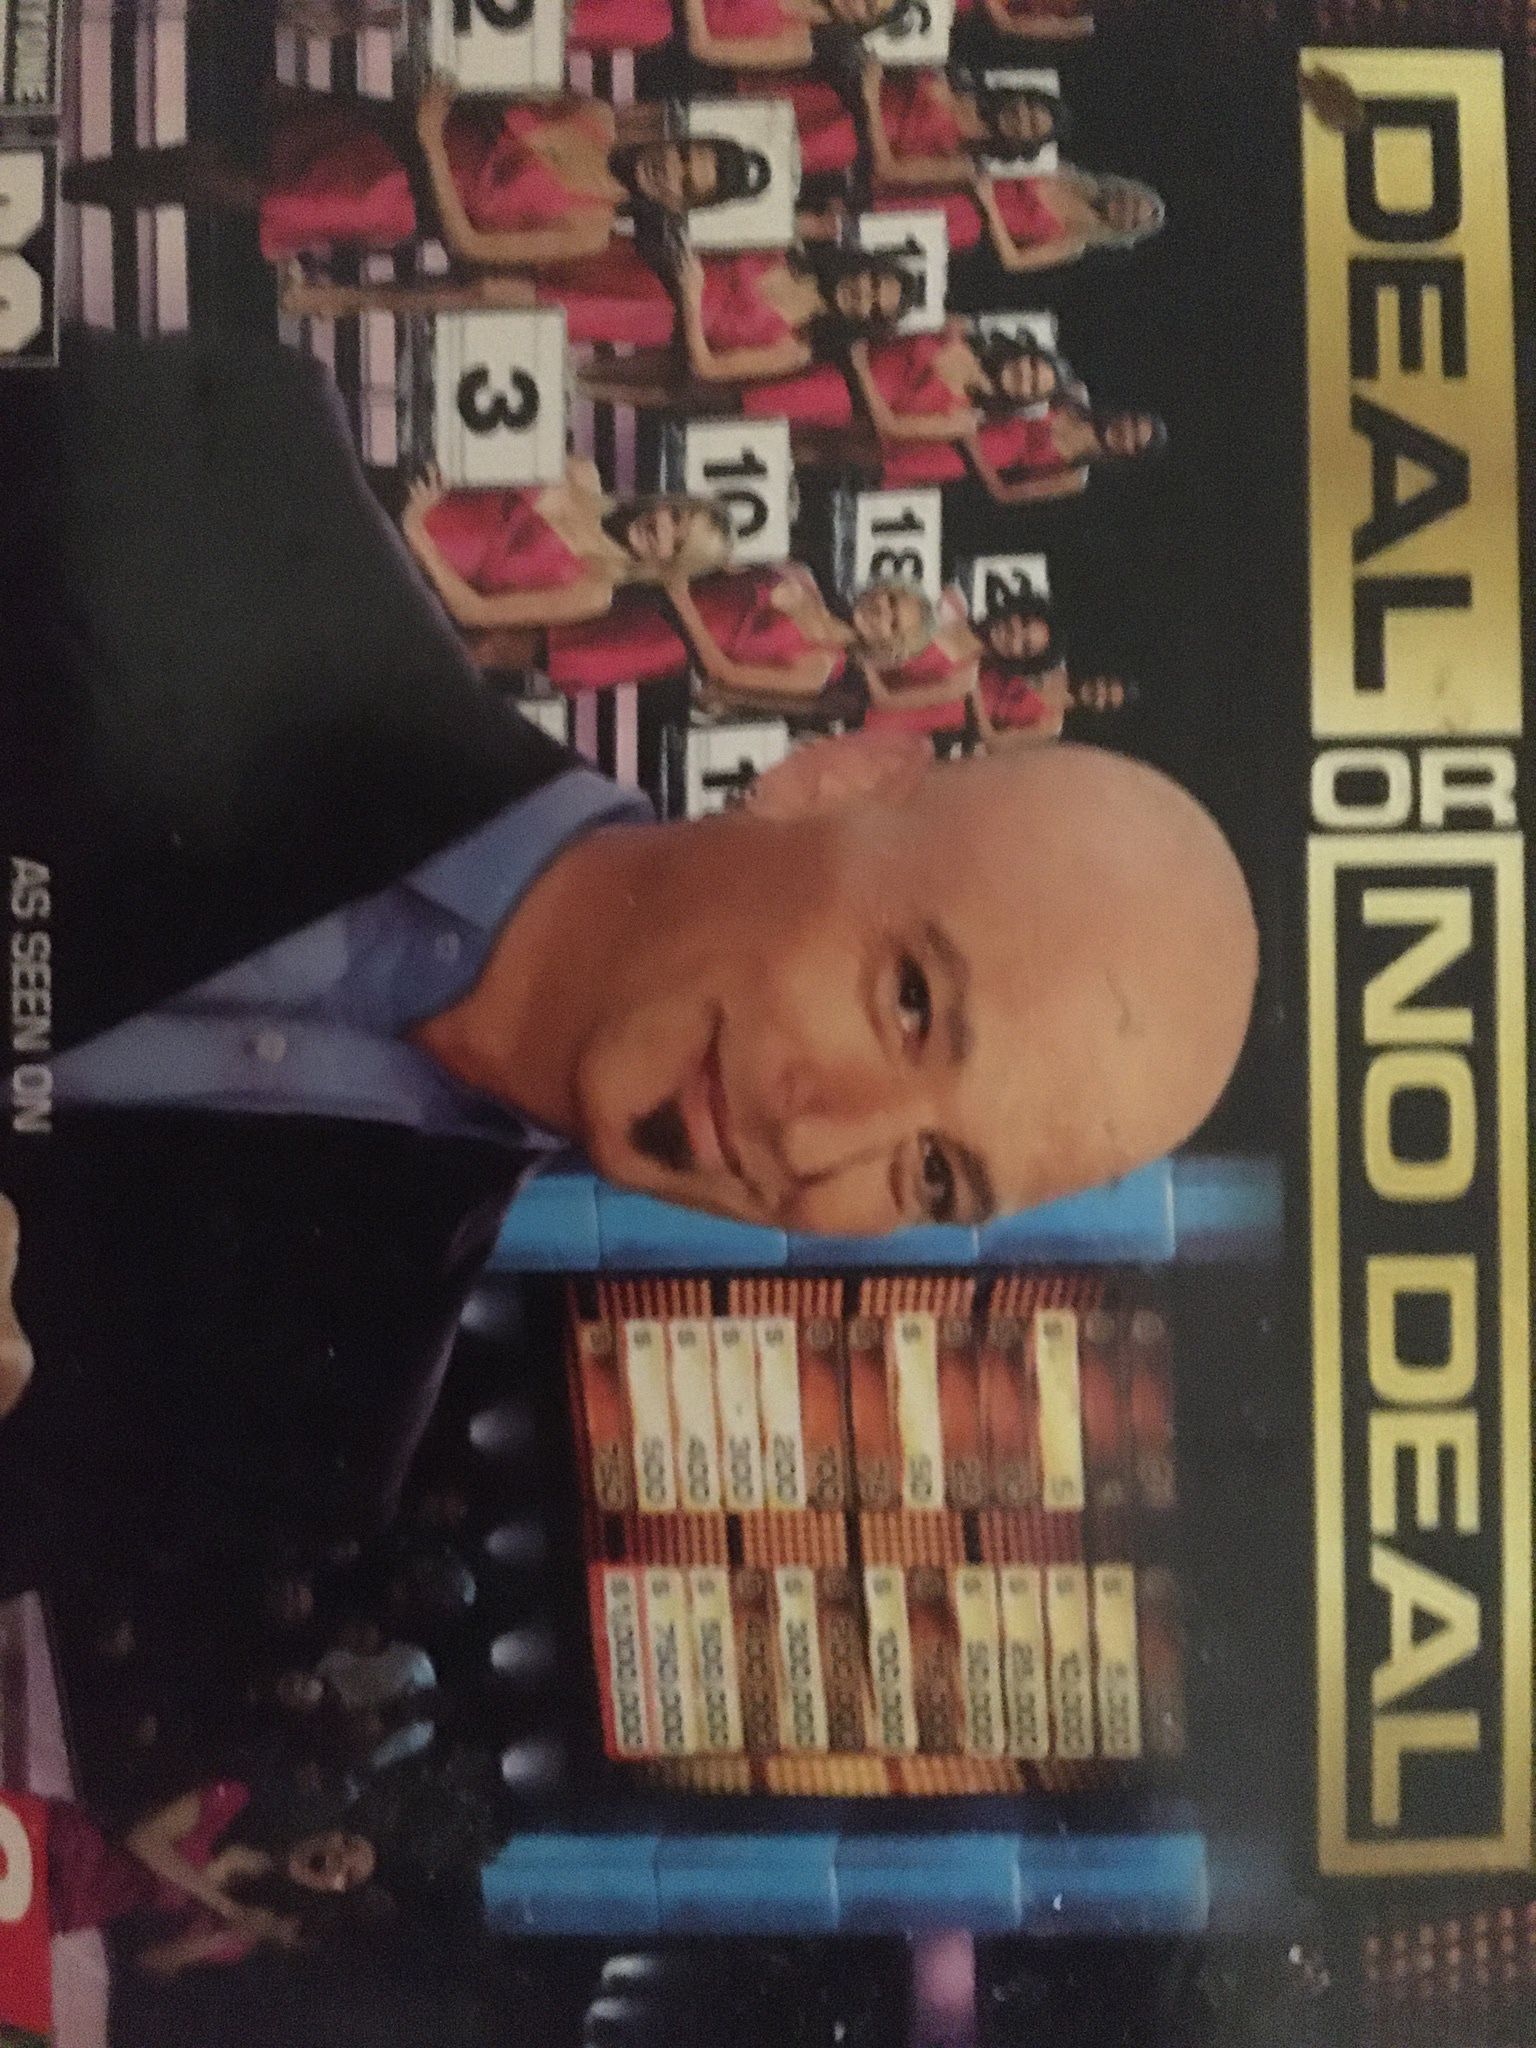 Deal Or No Deal Pc Game.